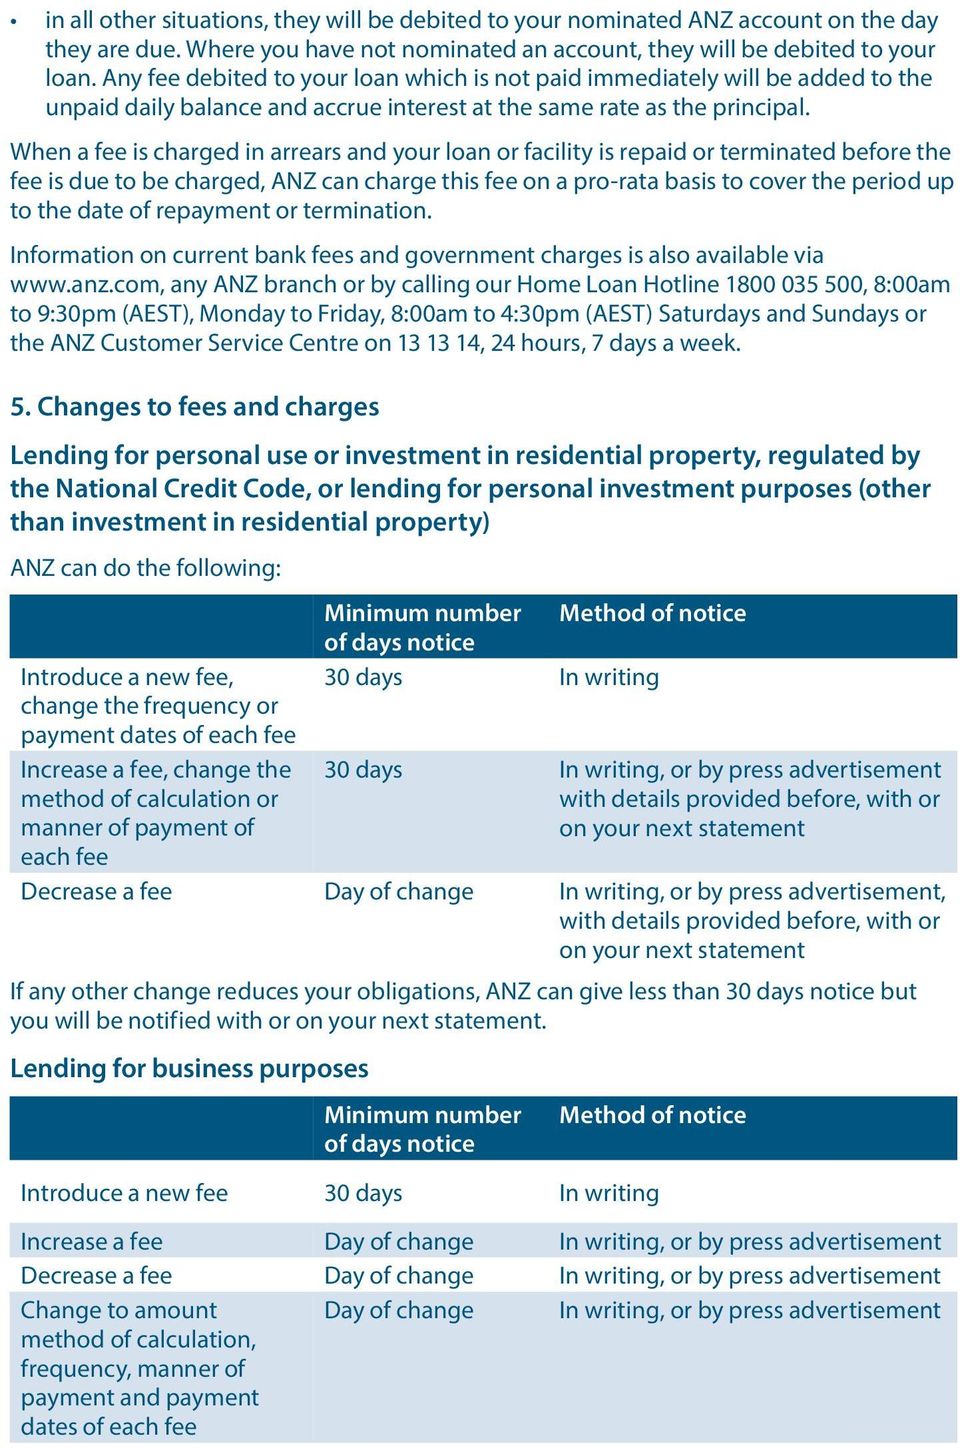 When a fee is charged in arrears and your loan or facility is repaid or terminated before the fee is due to be charged, ANZ can charge this fee on a pro-rata basis to cover the period up to the date